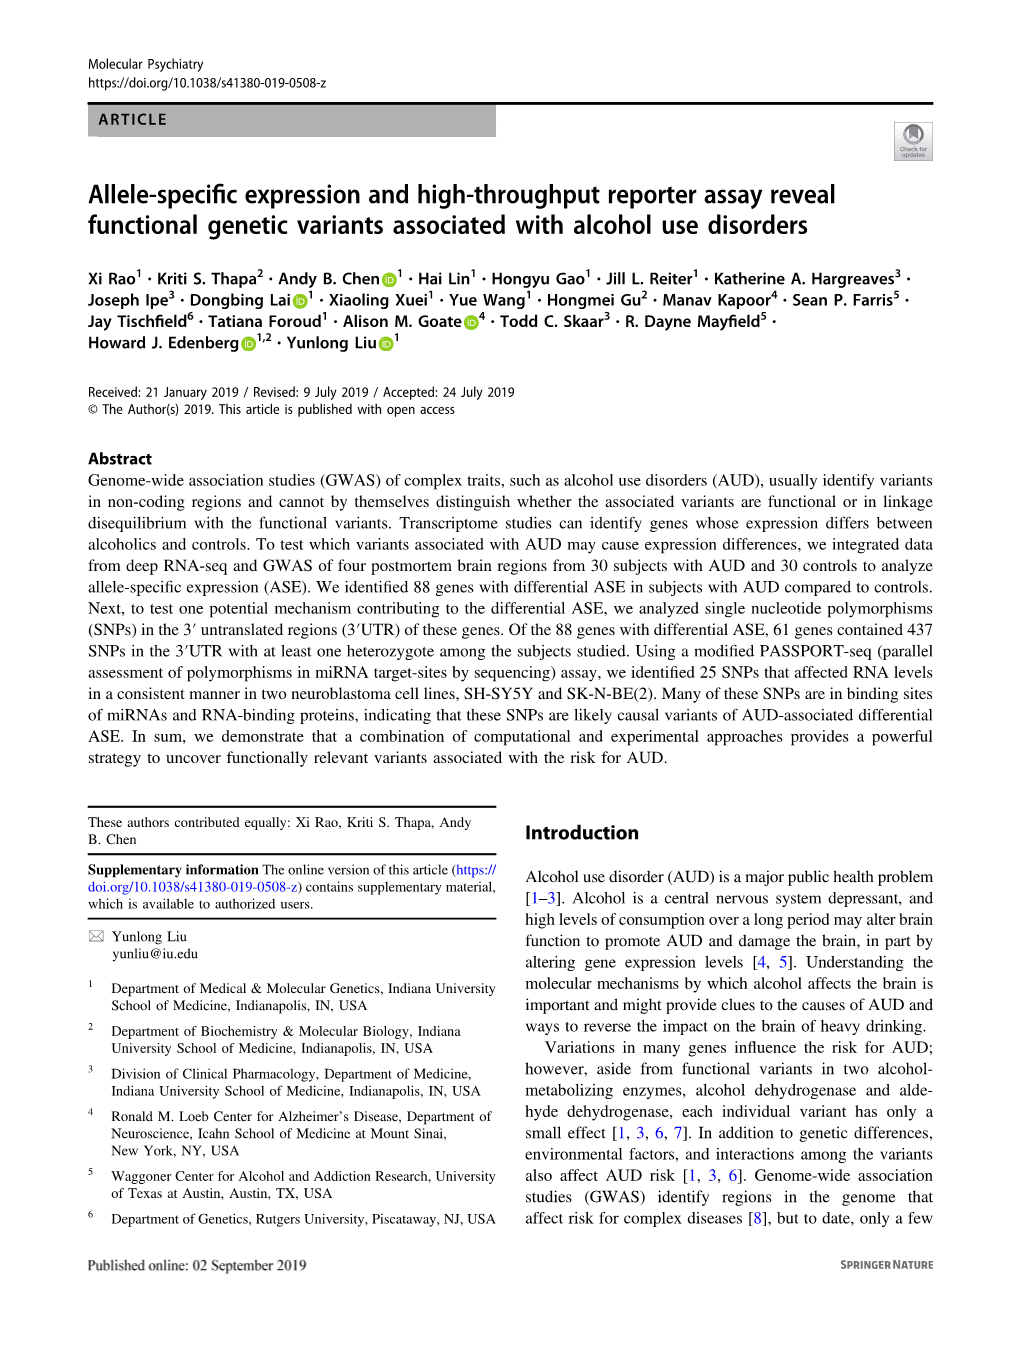 Allele-Specific Expression and High-Throughput Reporter Assay